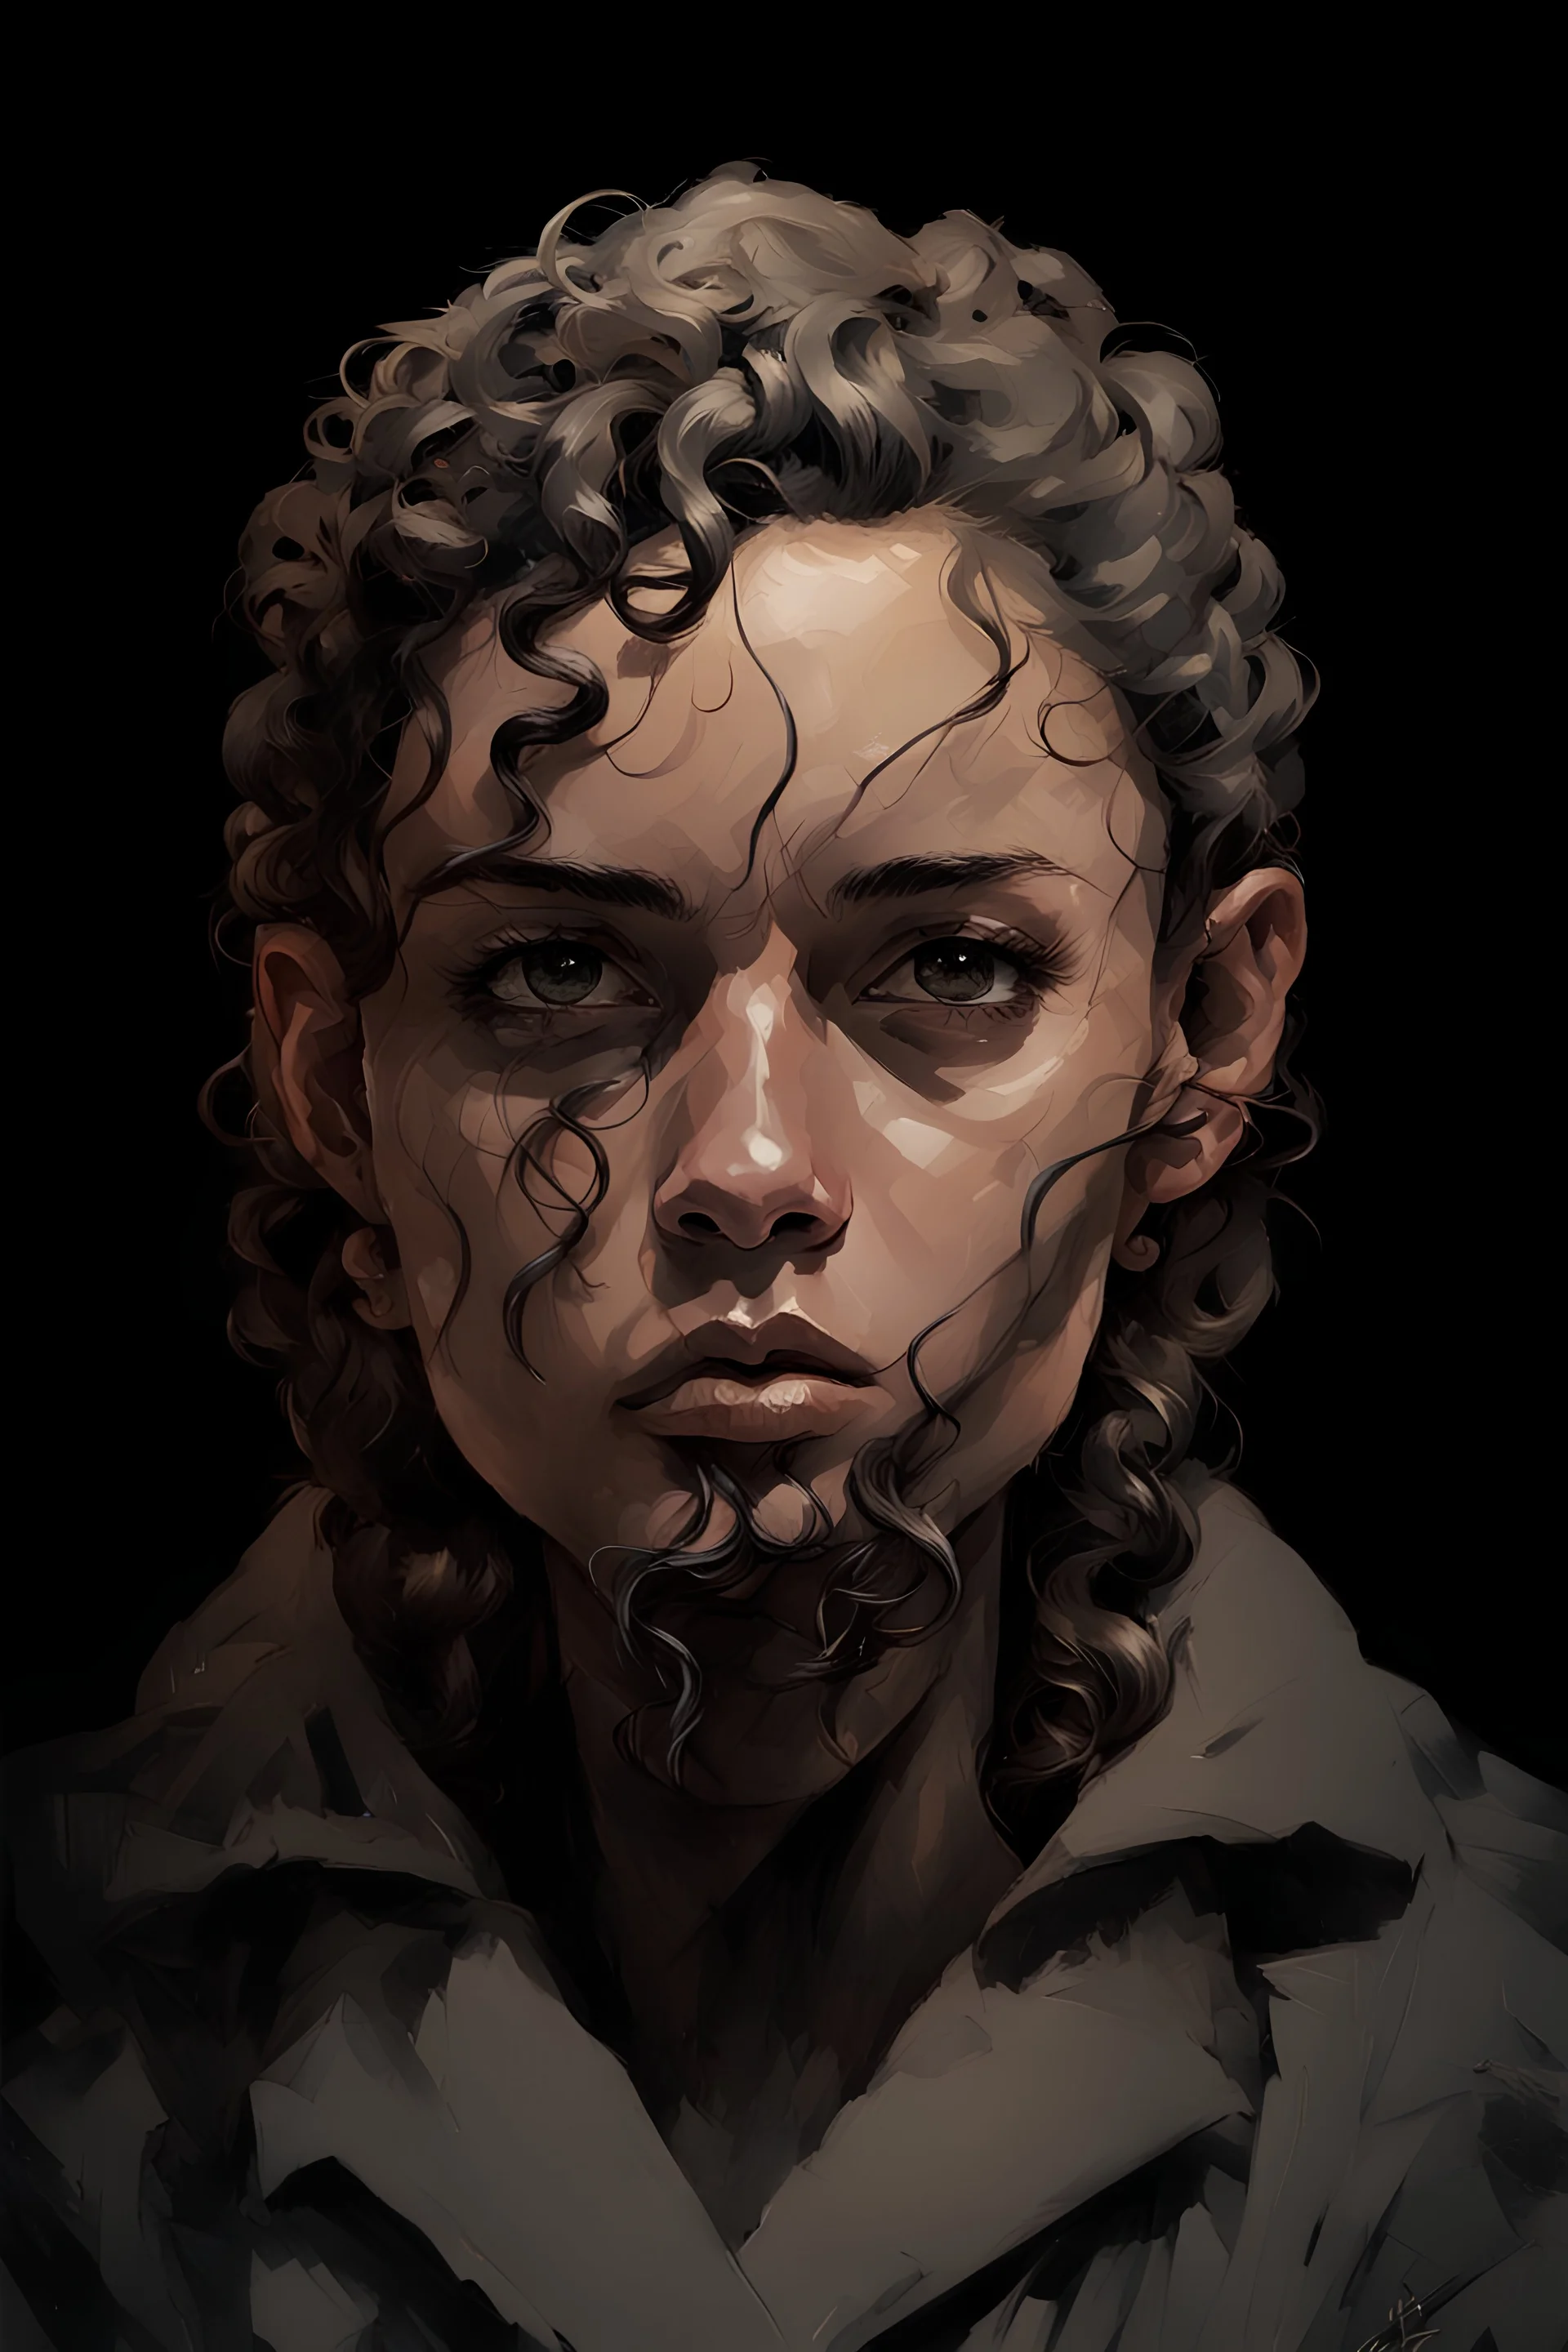 Portrait of a young woman with long curly hair, covering the ears. Include a short black horn on her forehead, and make it distinctive. include gray eyes, with a dark tanned skin complexion. Draw the portrait in the style of Yoji Shinkawa.